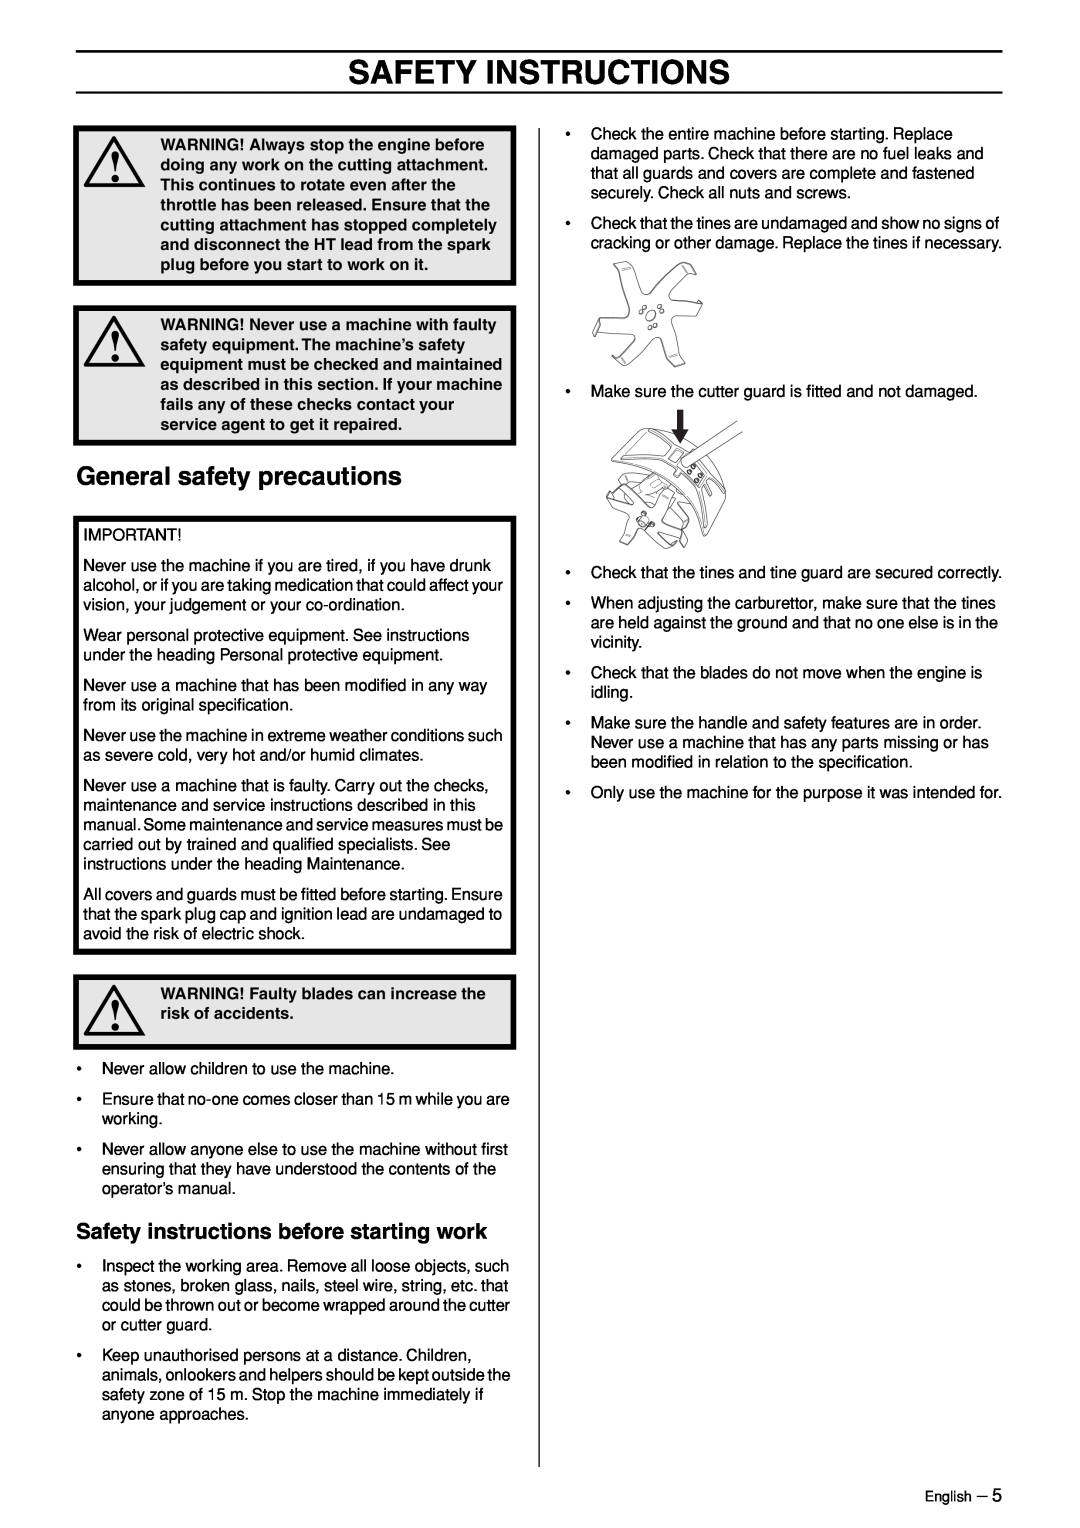 Husqvarna CA 150 General safety precautions, Safety instructions before starting work, Safety Instructions 